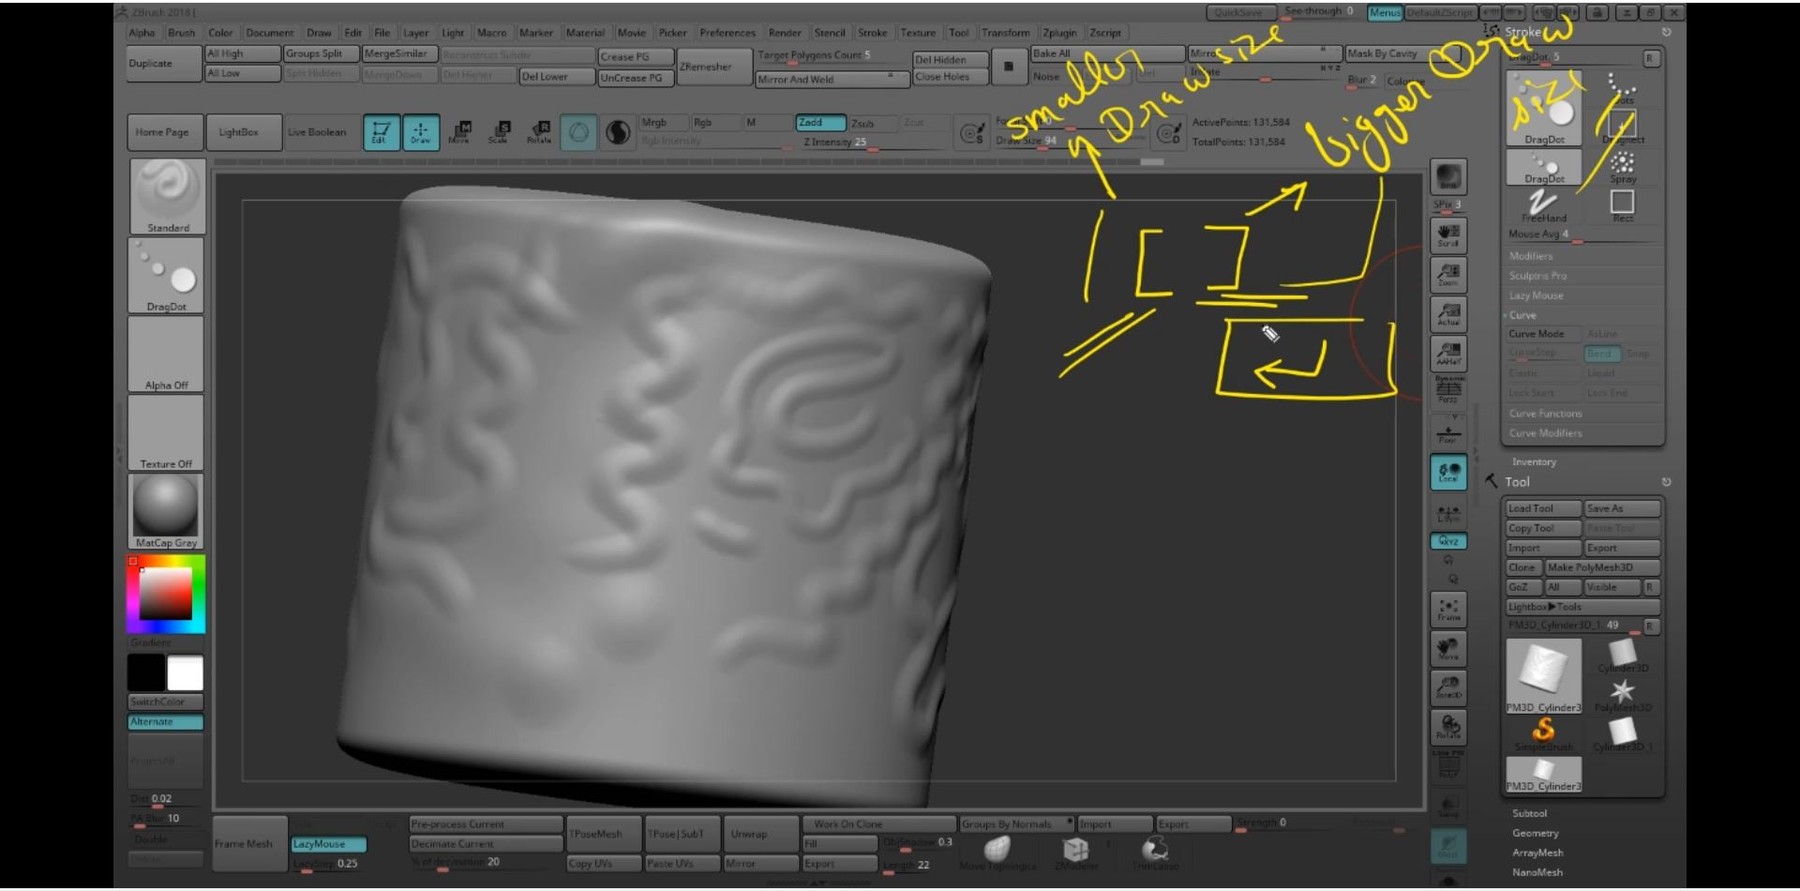 how to get rid of a stroke in zbrush